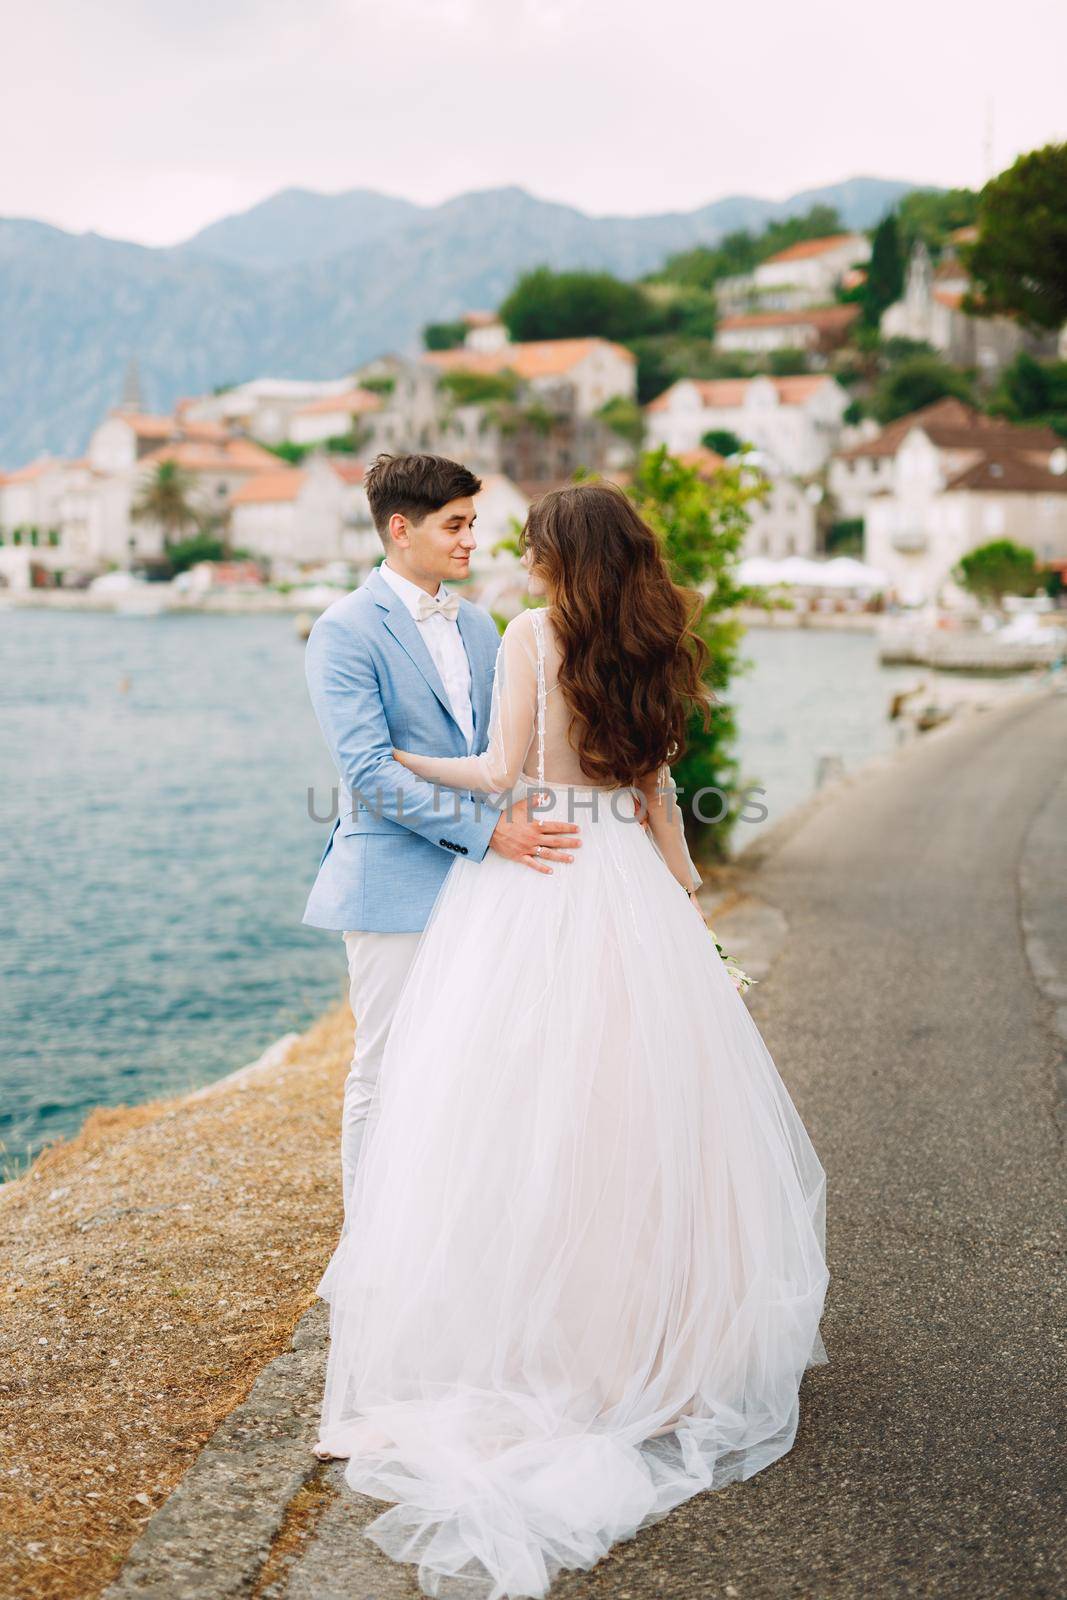 The bride and groom tenderly embrace on the seashore near the cozy old town of Perast in the Bay of Kotor . High quality photo